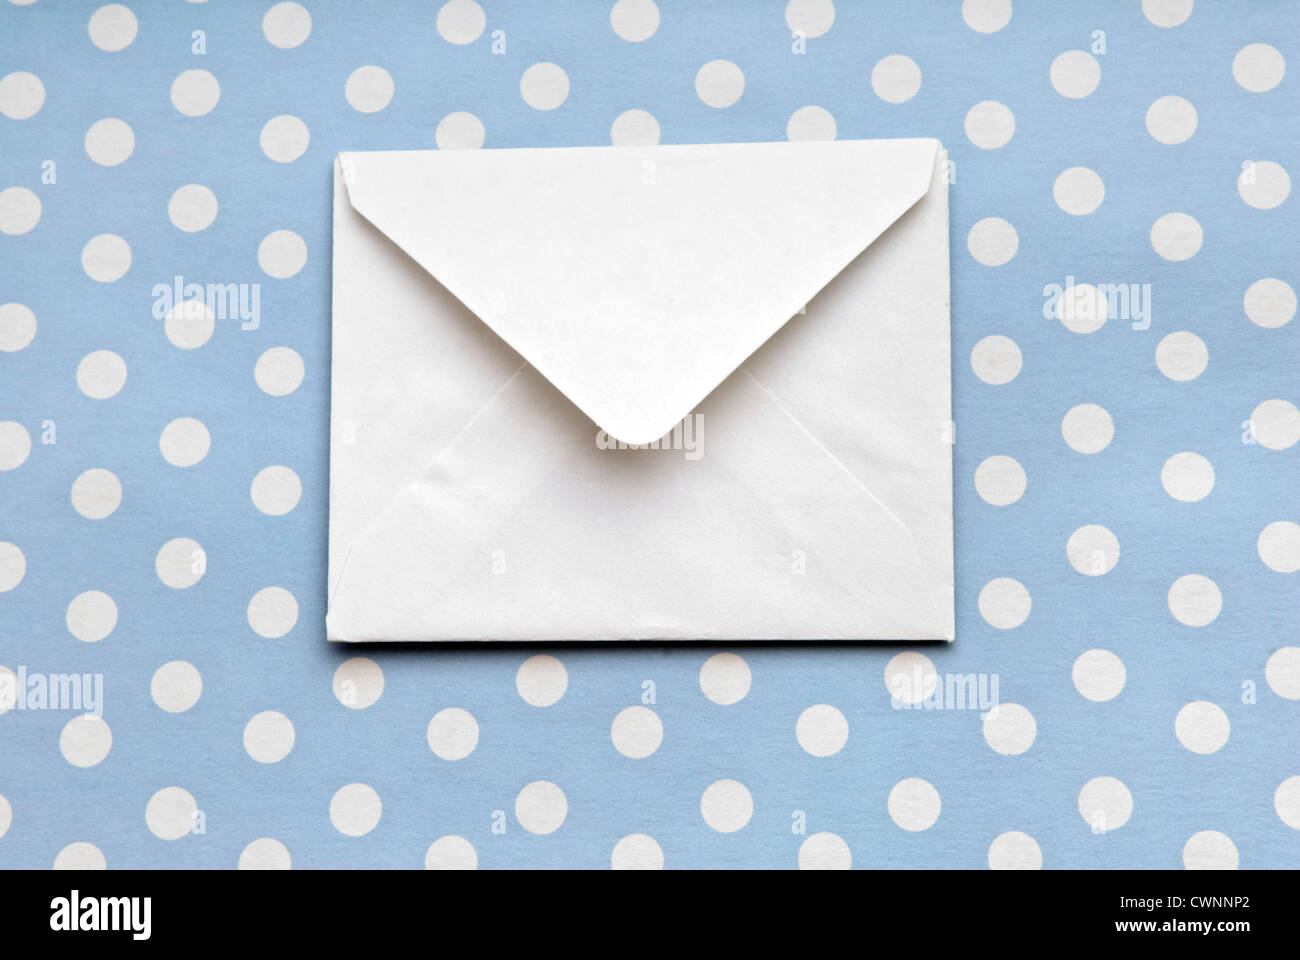 Envelope on gift wrapping paper with polka dots Stock Photo